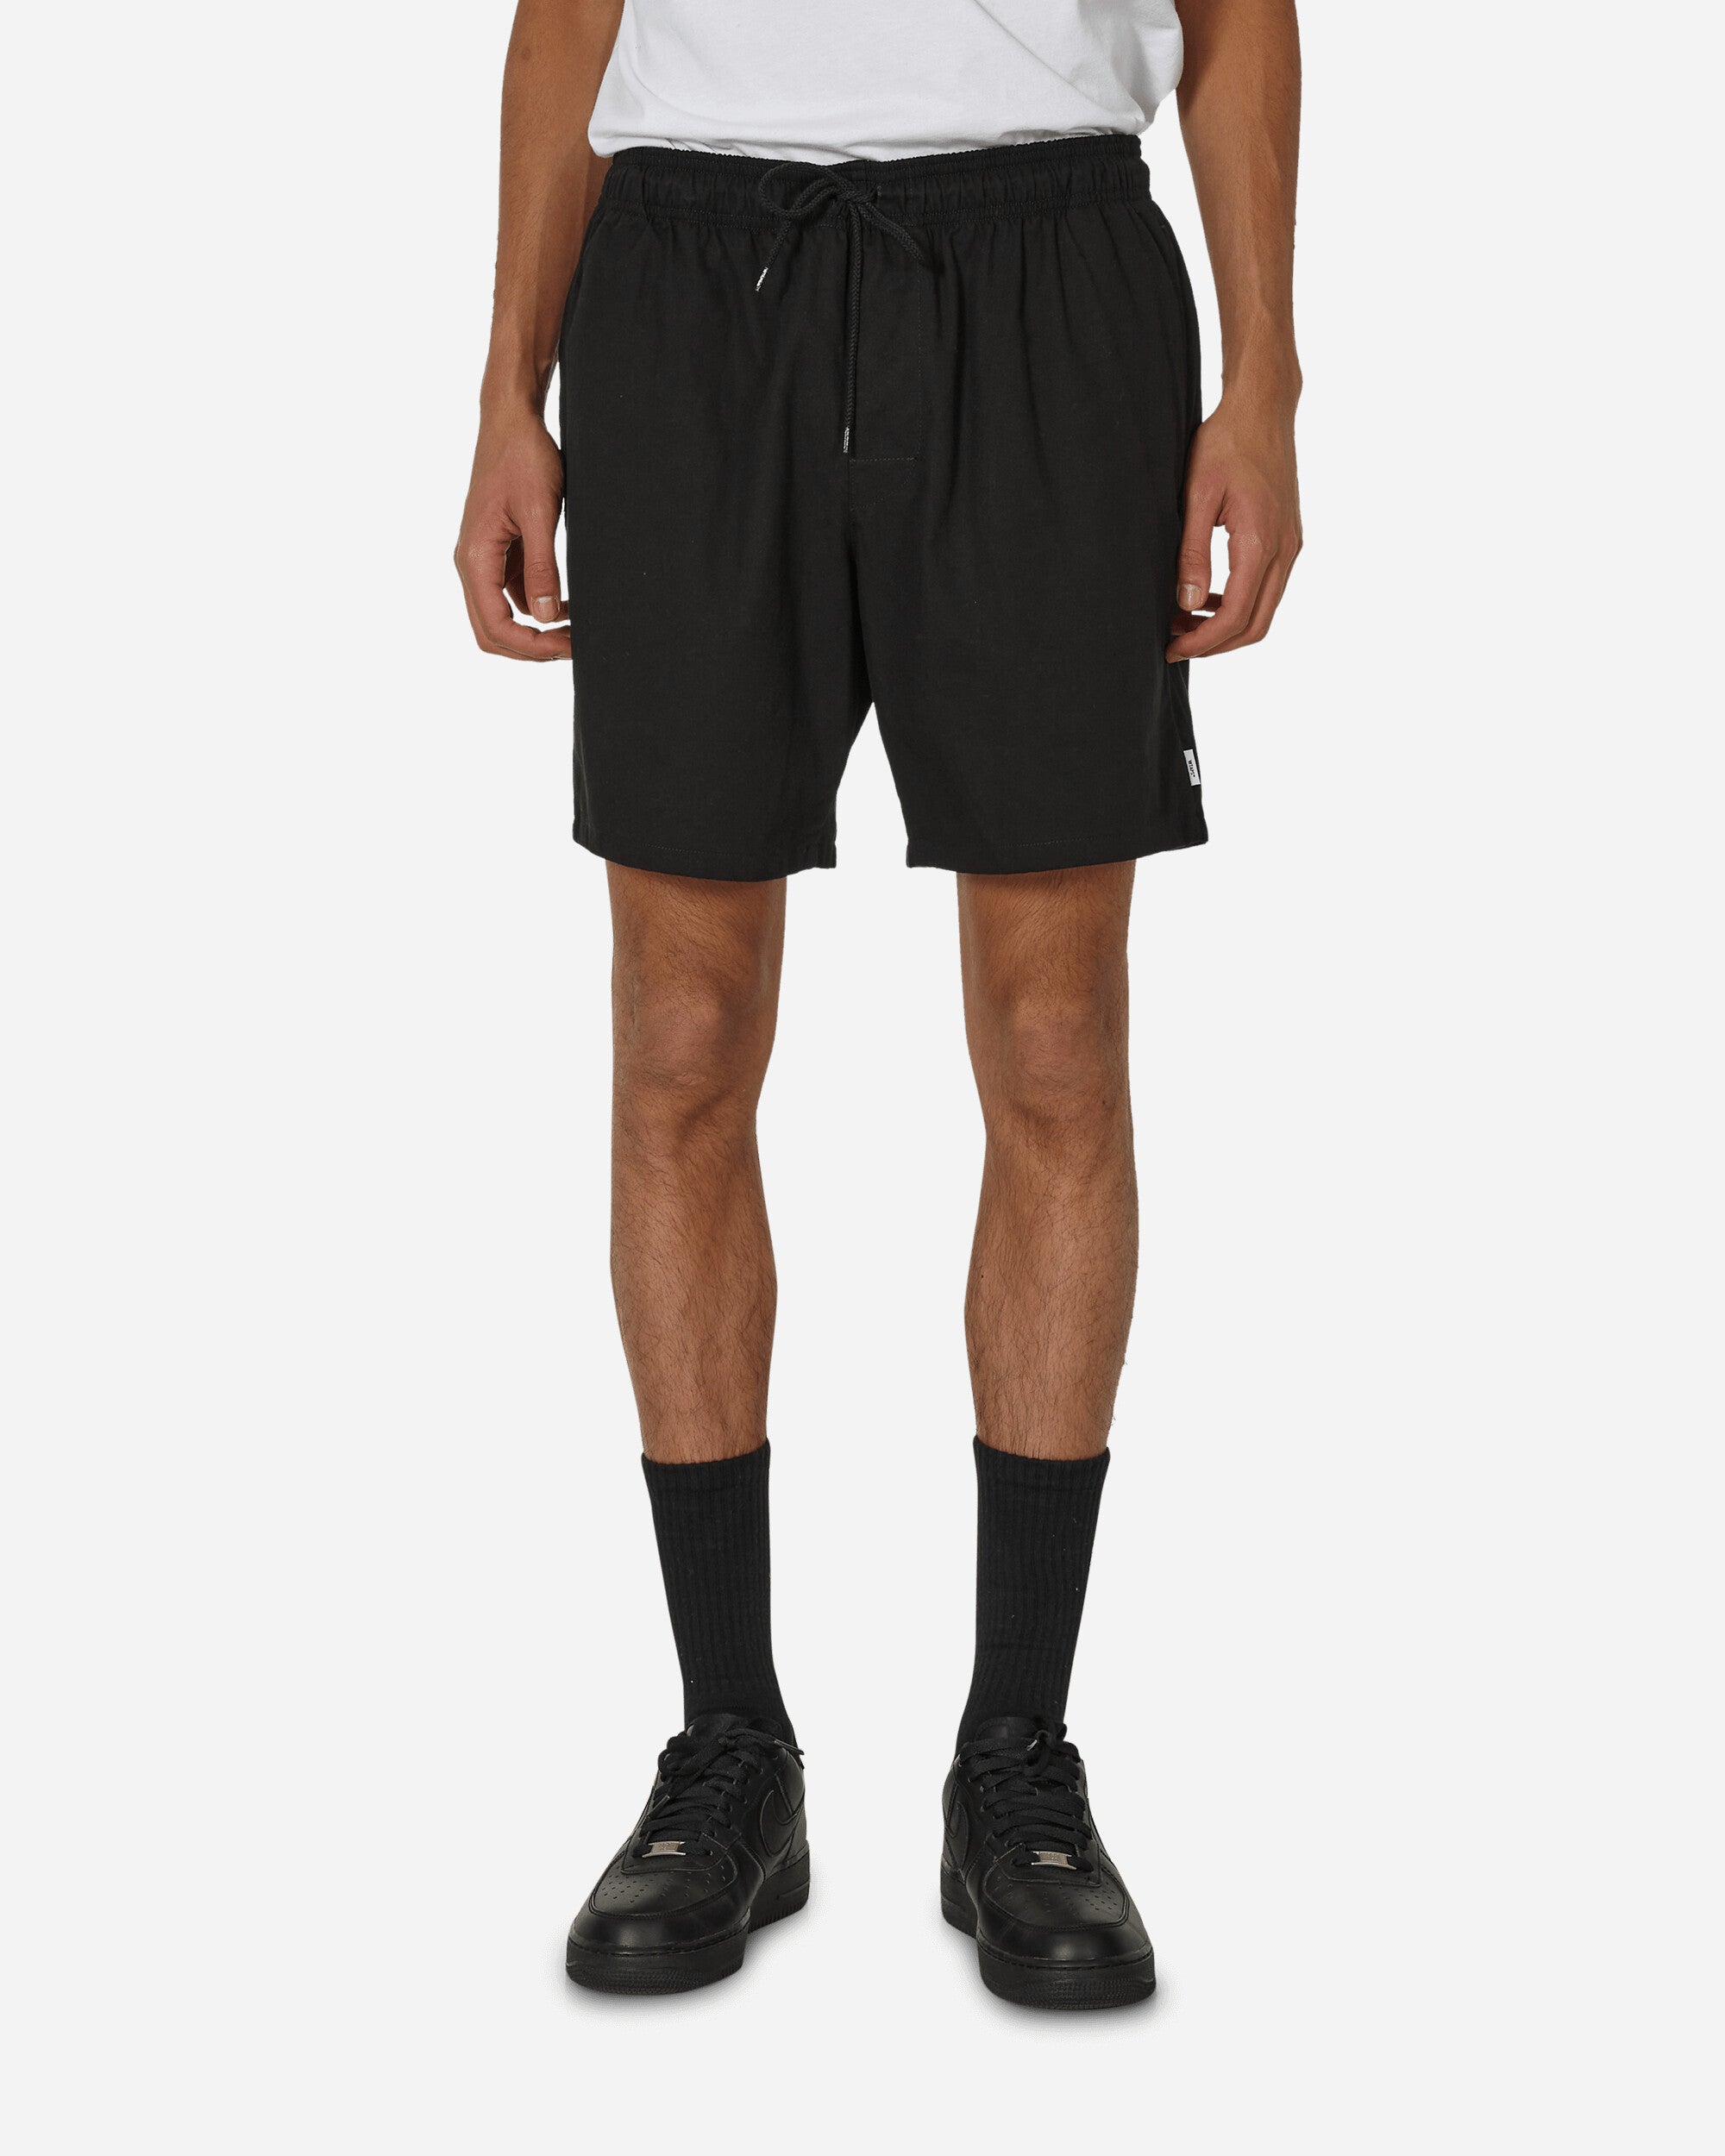 WTAPS SDDS2001 Cotton Twill Shorts Black - Slam Jam® Official Store